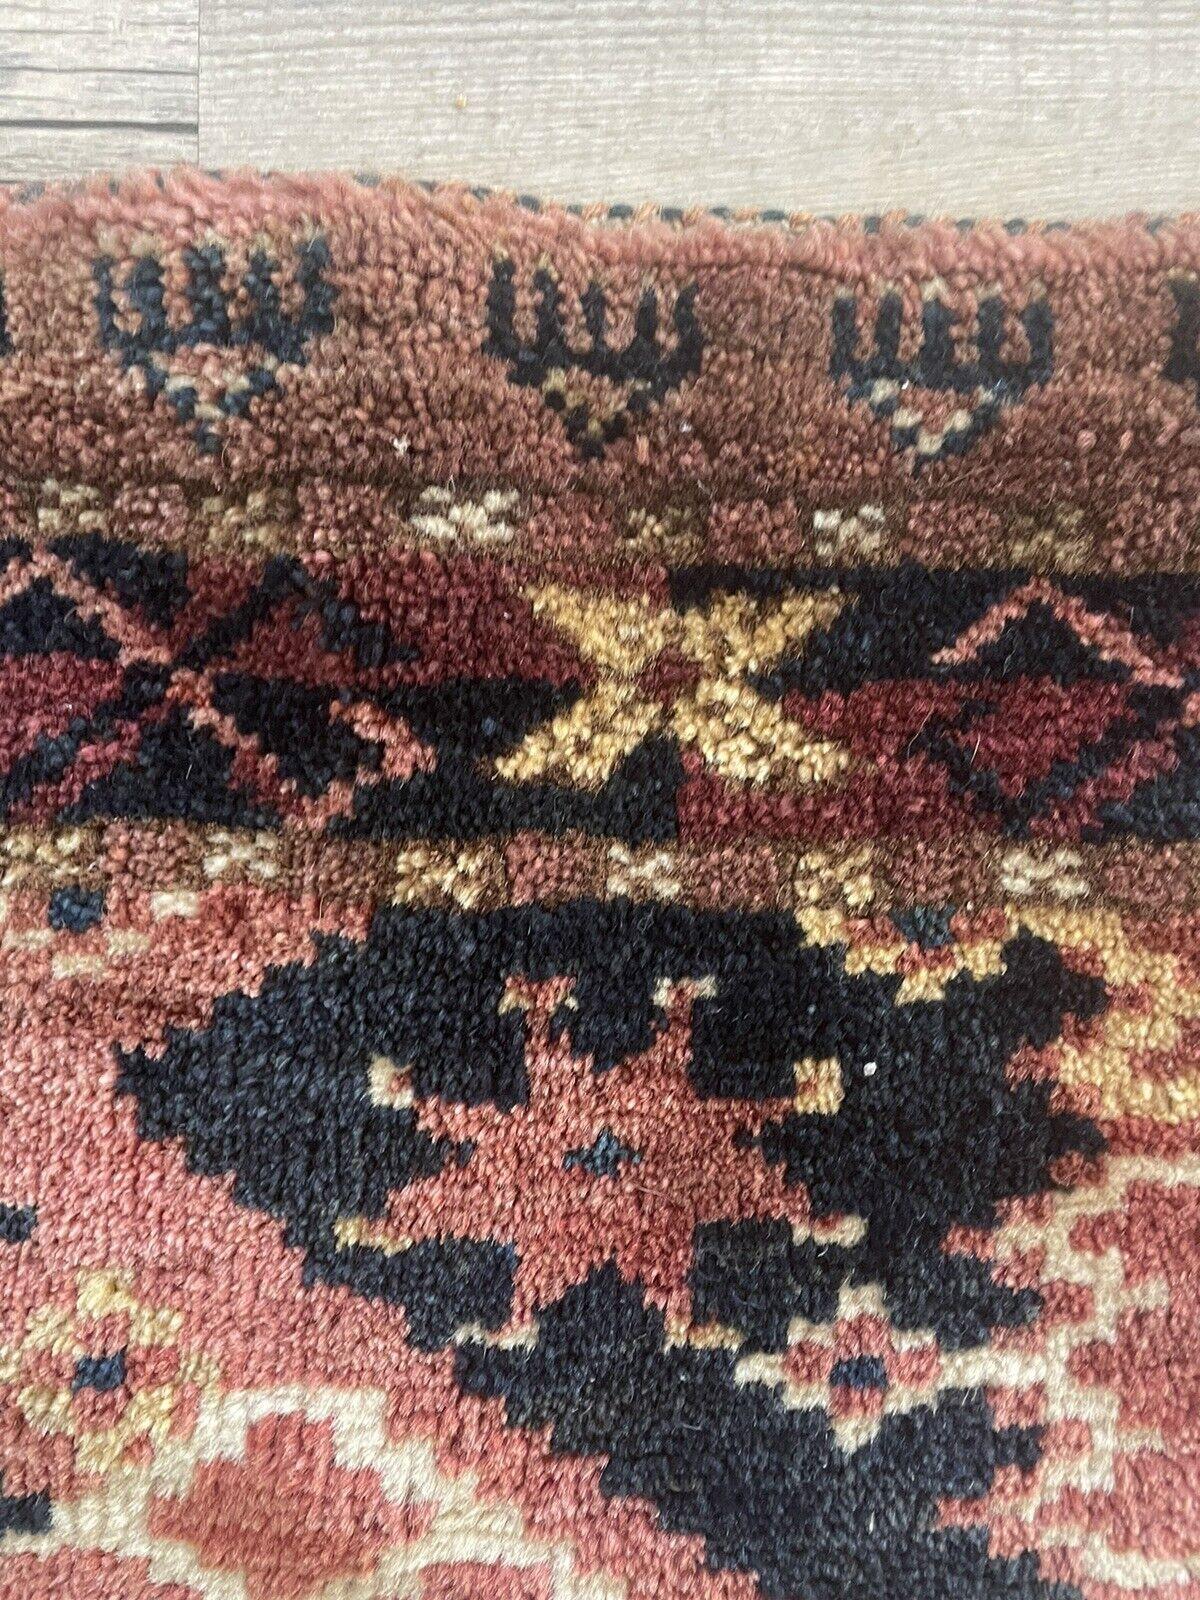 Handmade Antique Afghan Beshir Collectible Chuval Rug from the 1900s:

Dimensions:
This rectangular chuval rug measures approximately 1.5 feet (46 cm) in width and 4.8 feet (146 cm) in height.
Its compact size makes it suitable for various spaces,